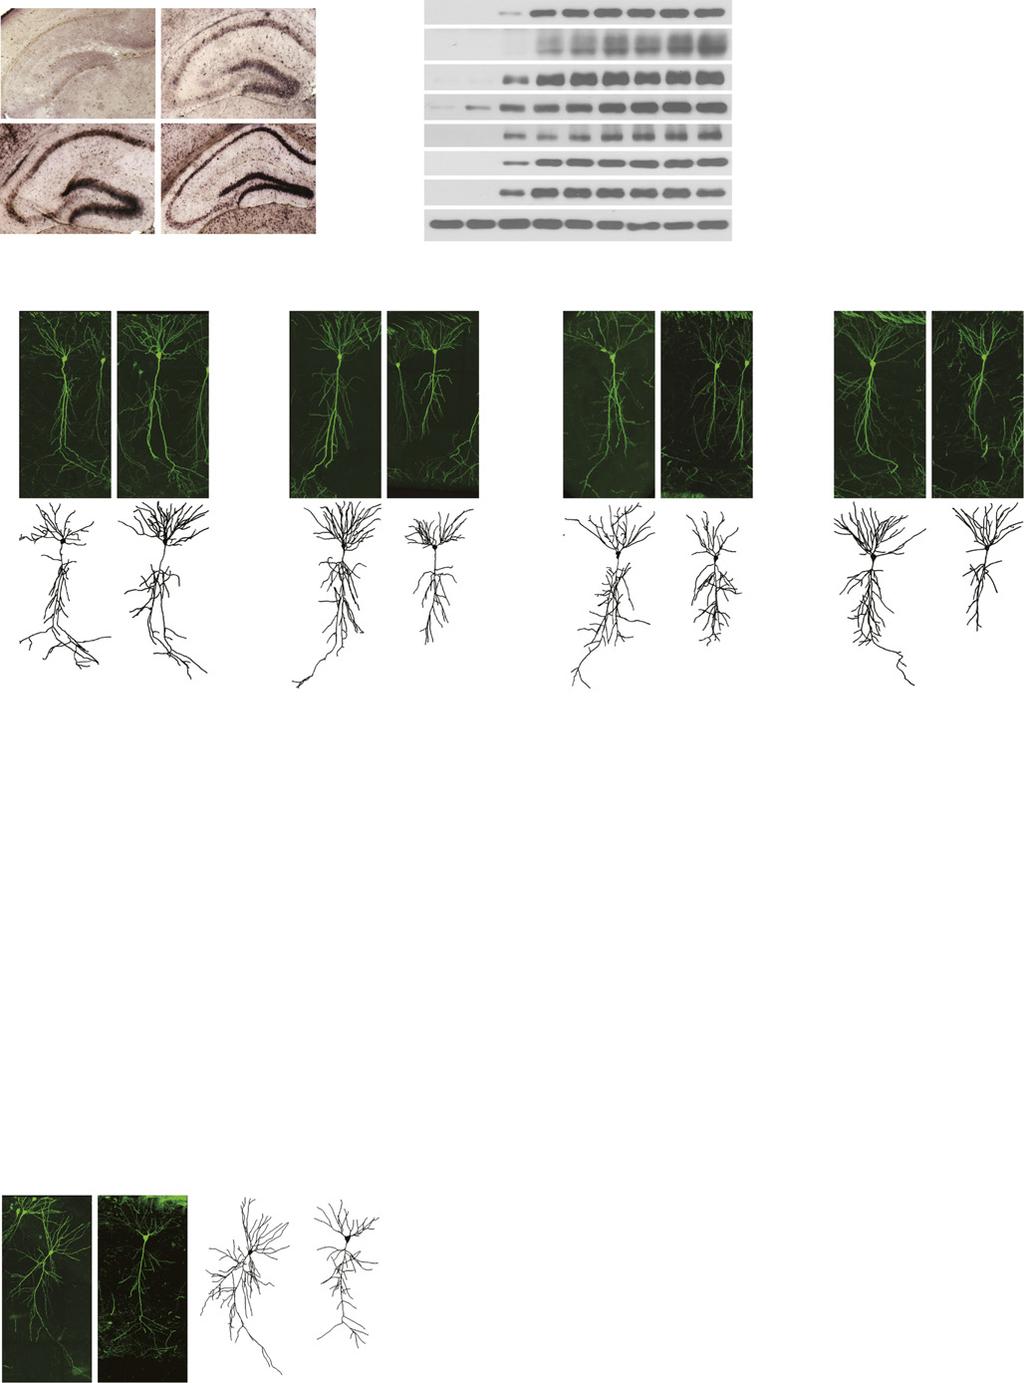 Number of branch points Number of dendritic branch points A P 2wk CA3 1wk 3mo CA1 DG B VGLUT1 PSD95 GluA1 GluN1 CaMKIIα CaMKIIβ Tubulin E18 P 1wk 2wk 3wk 1mo 2mo 3mo 6mo D E 4.